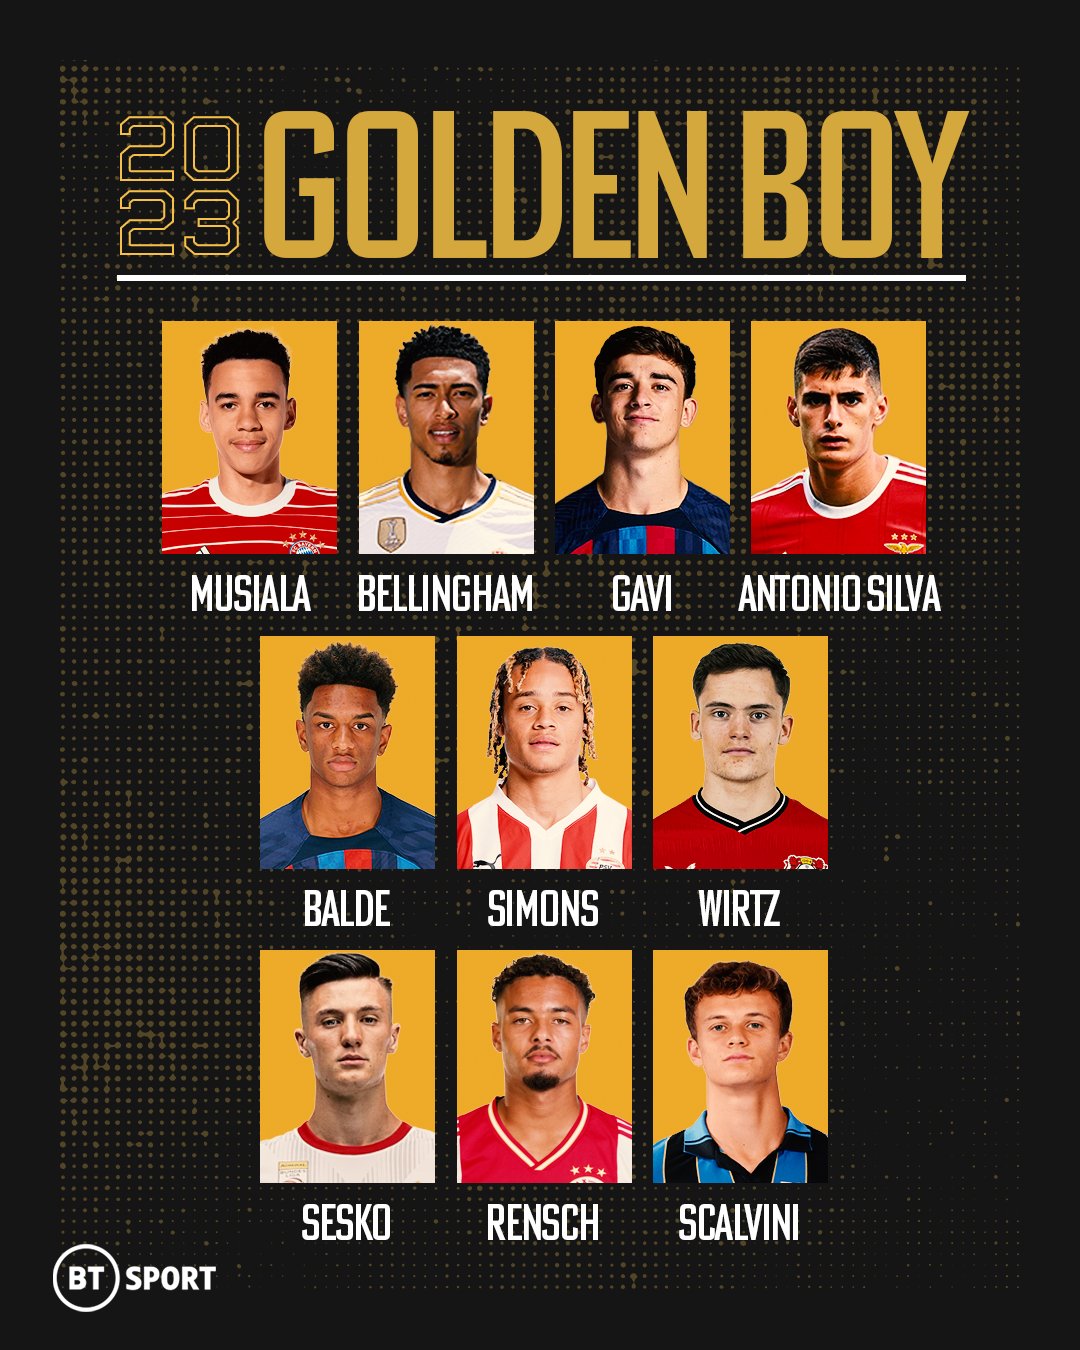 Football on BT Sport on Twitter: "The top 🔟 candidates to win the 2023 Golden Boy Award 💫 Which star wins? https://t.co/W2cBasKqHA" / Twitter